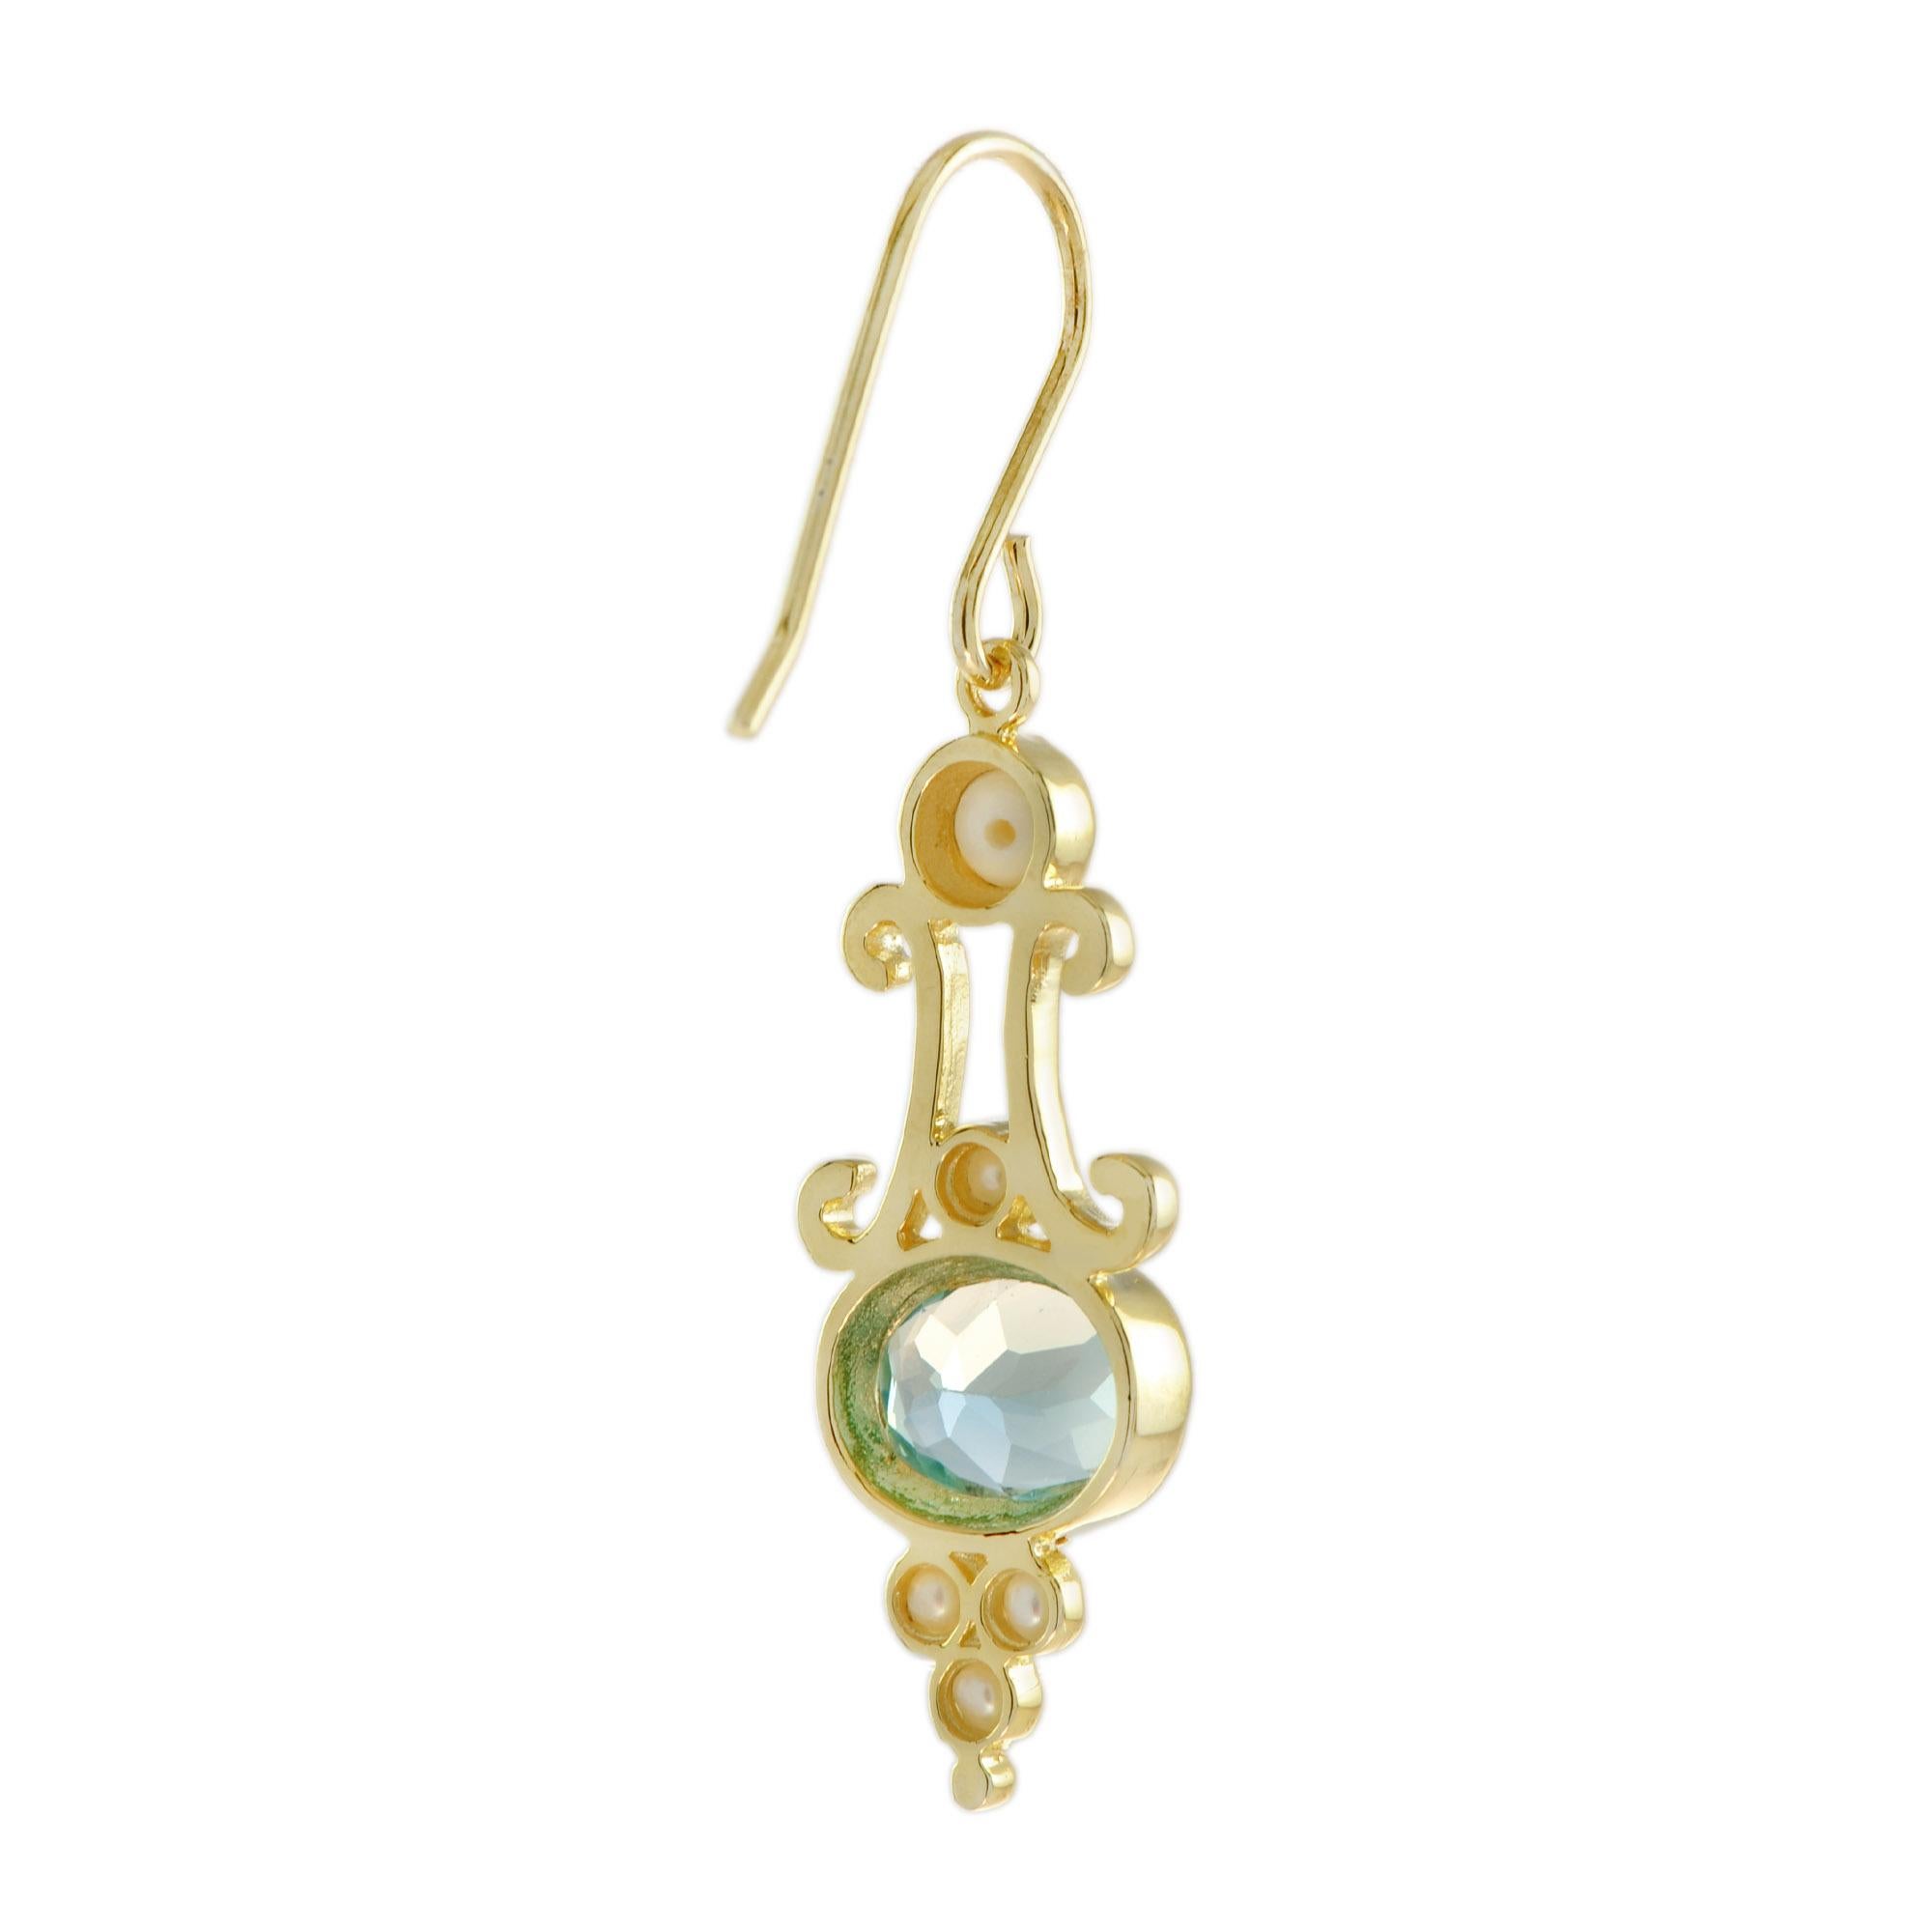 Oval Cut Victorian Style Blue Topaz and Pearl Drop Earrings in 14K Yellow Gold